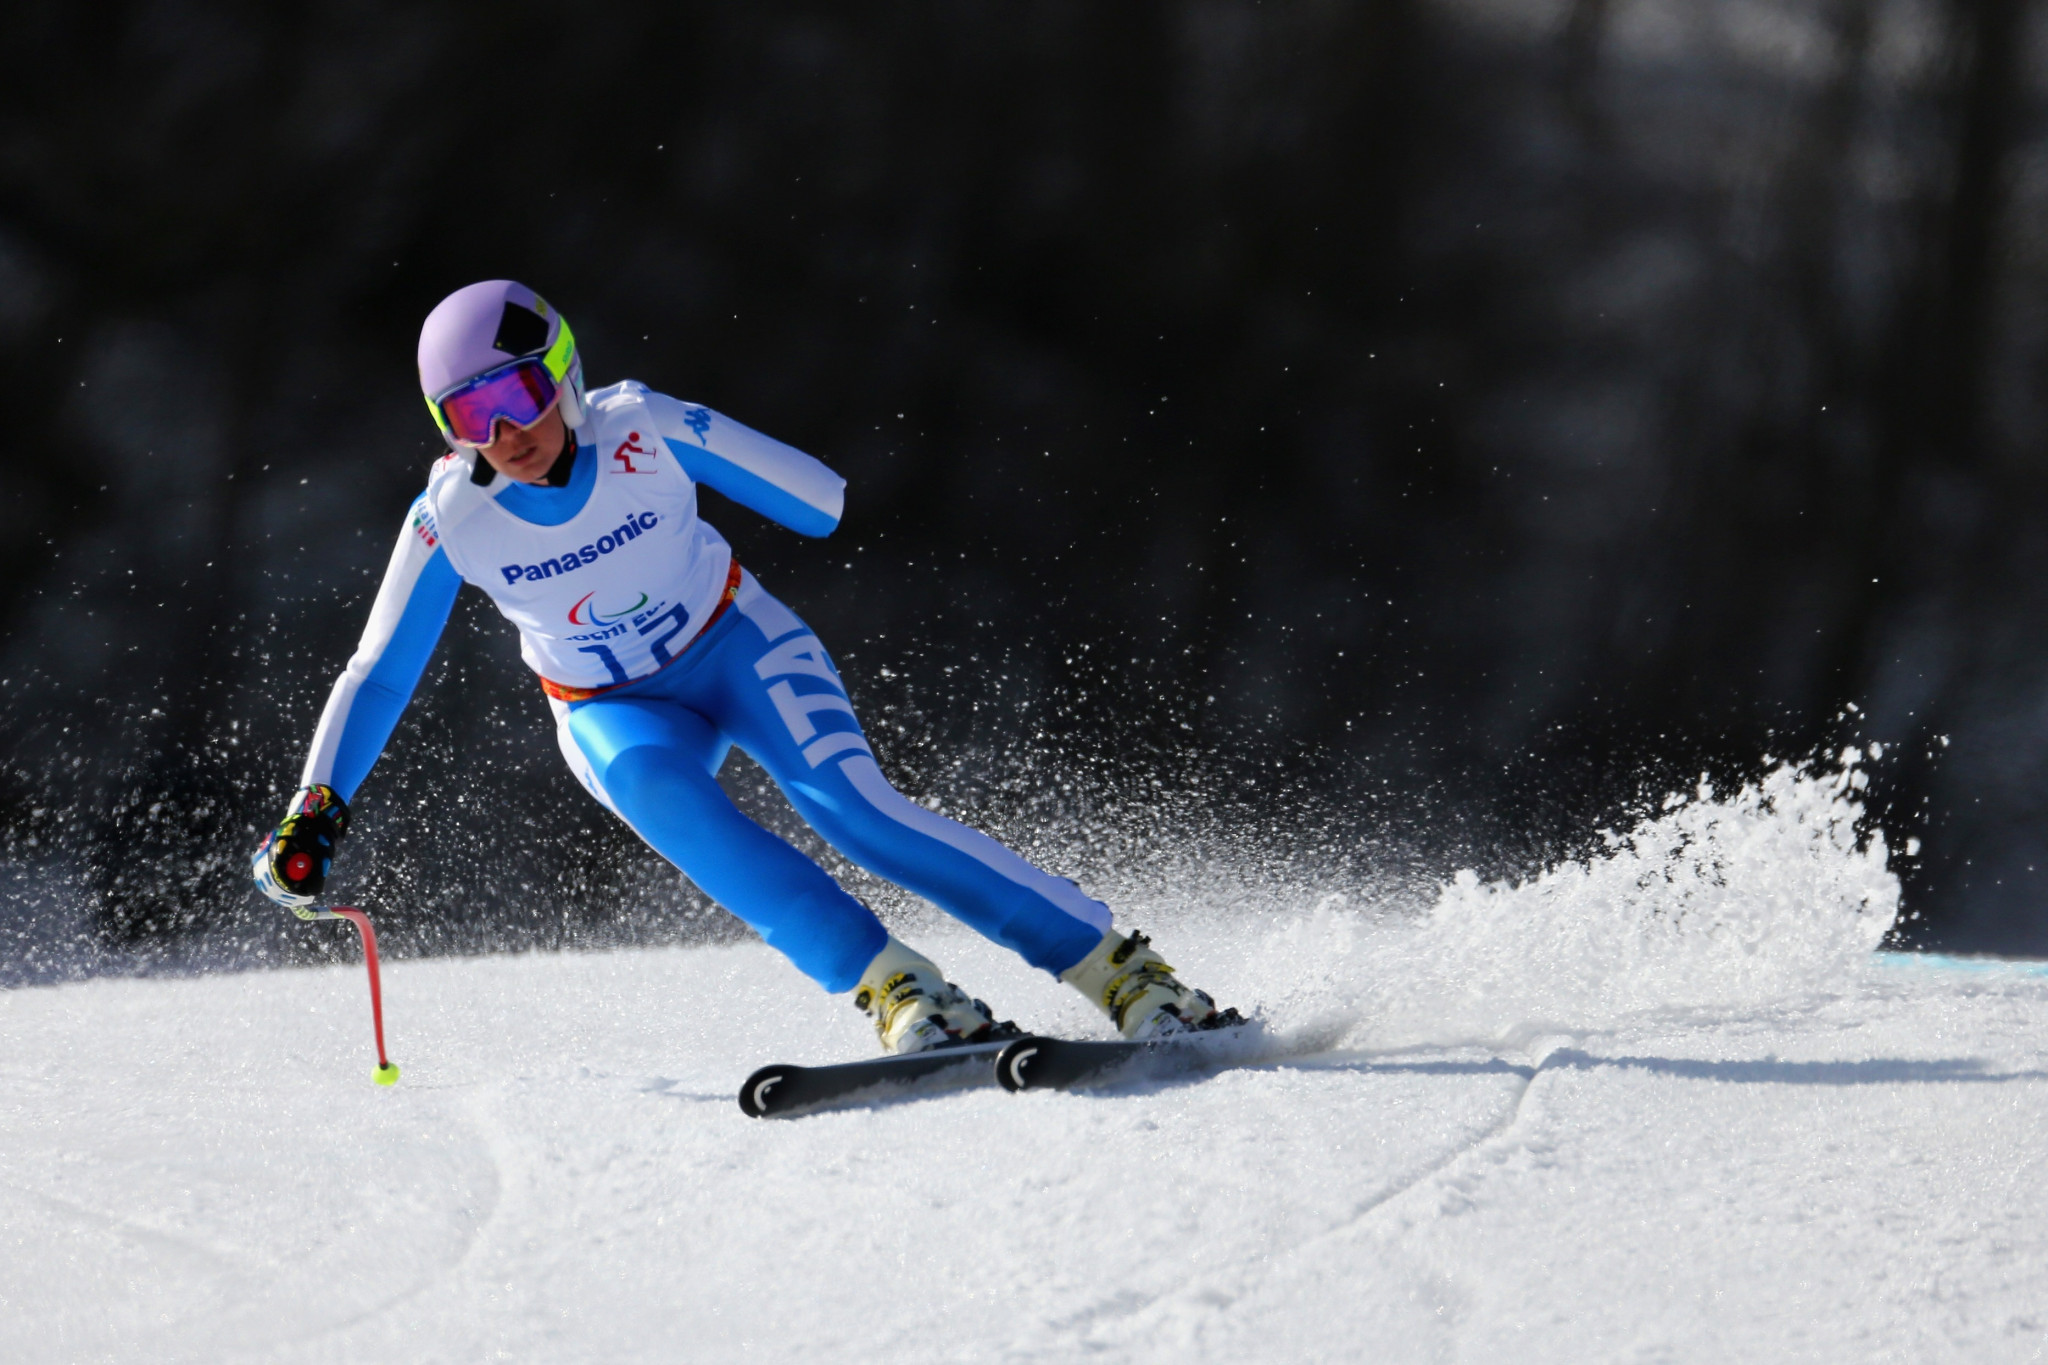 Italy's Melania Corradini won the women's super-G standing event ©Getty Images